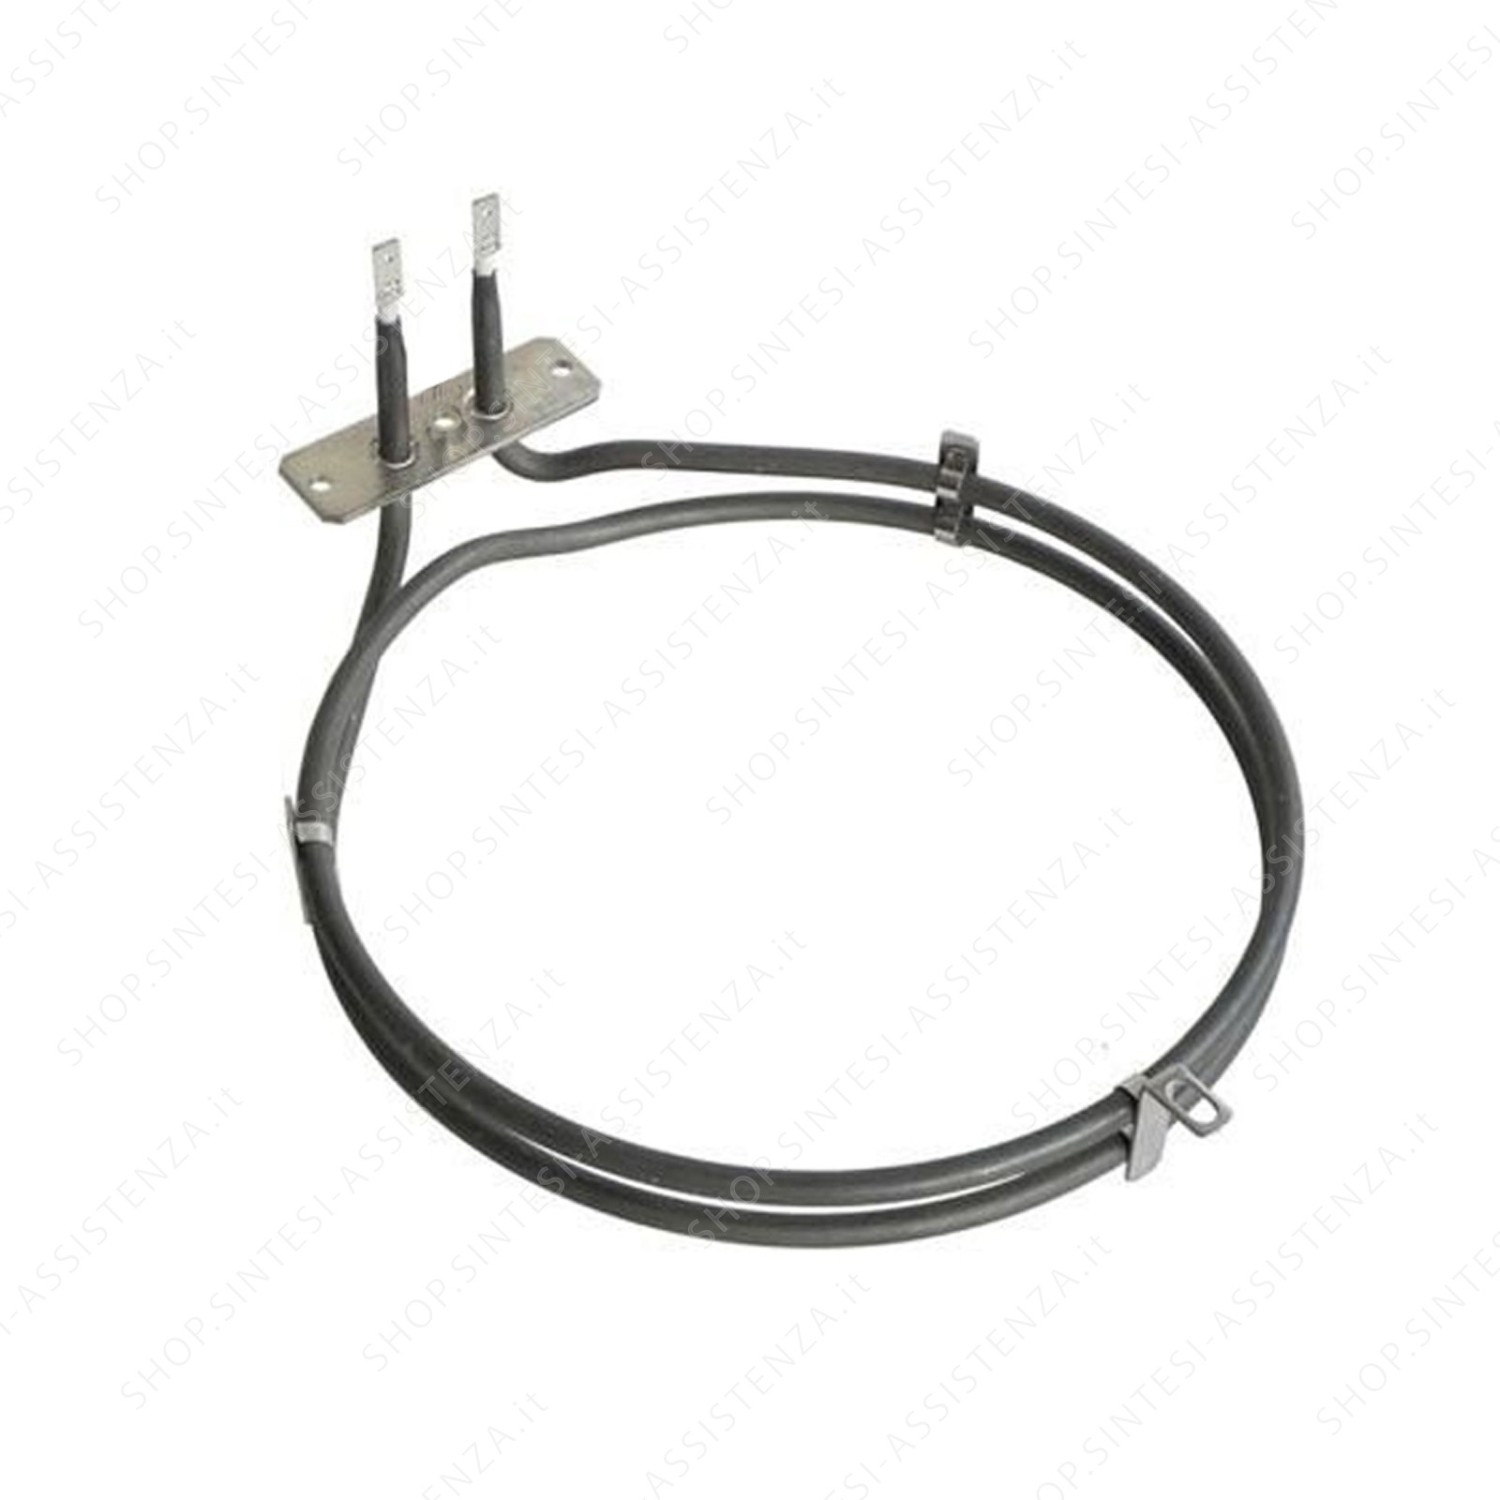 VENTILATED CIRCULAR RESISTANCE FOR SMEG OVEN 1550 W - 806891275